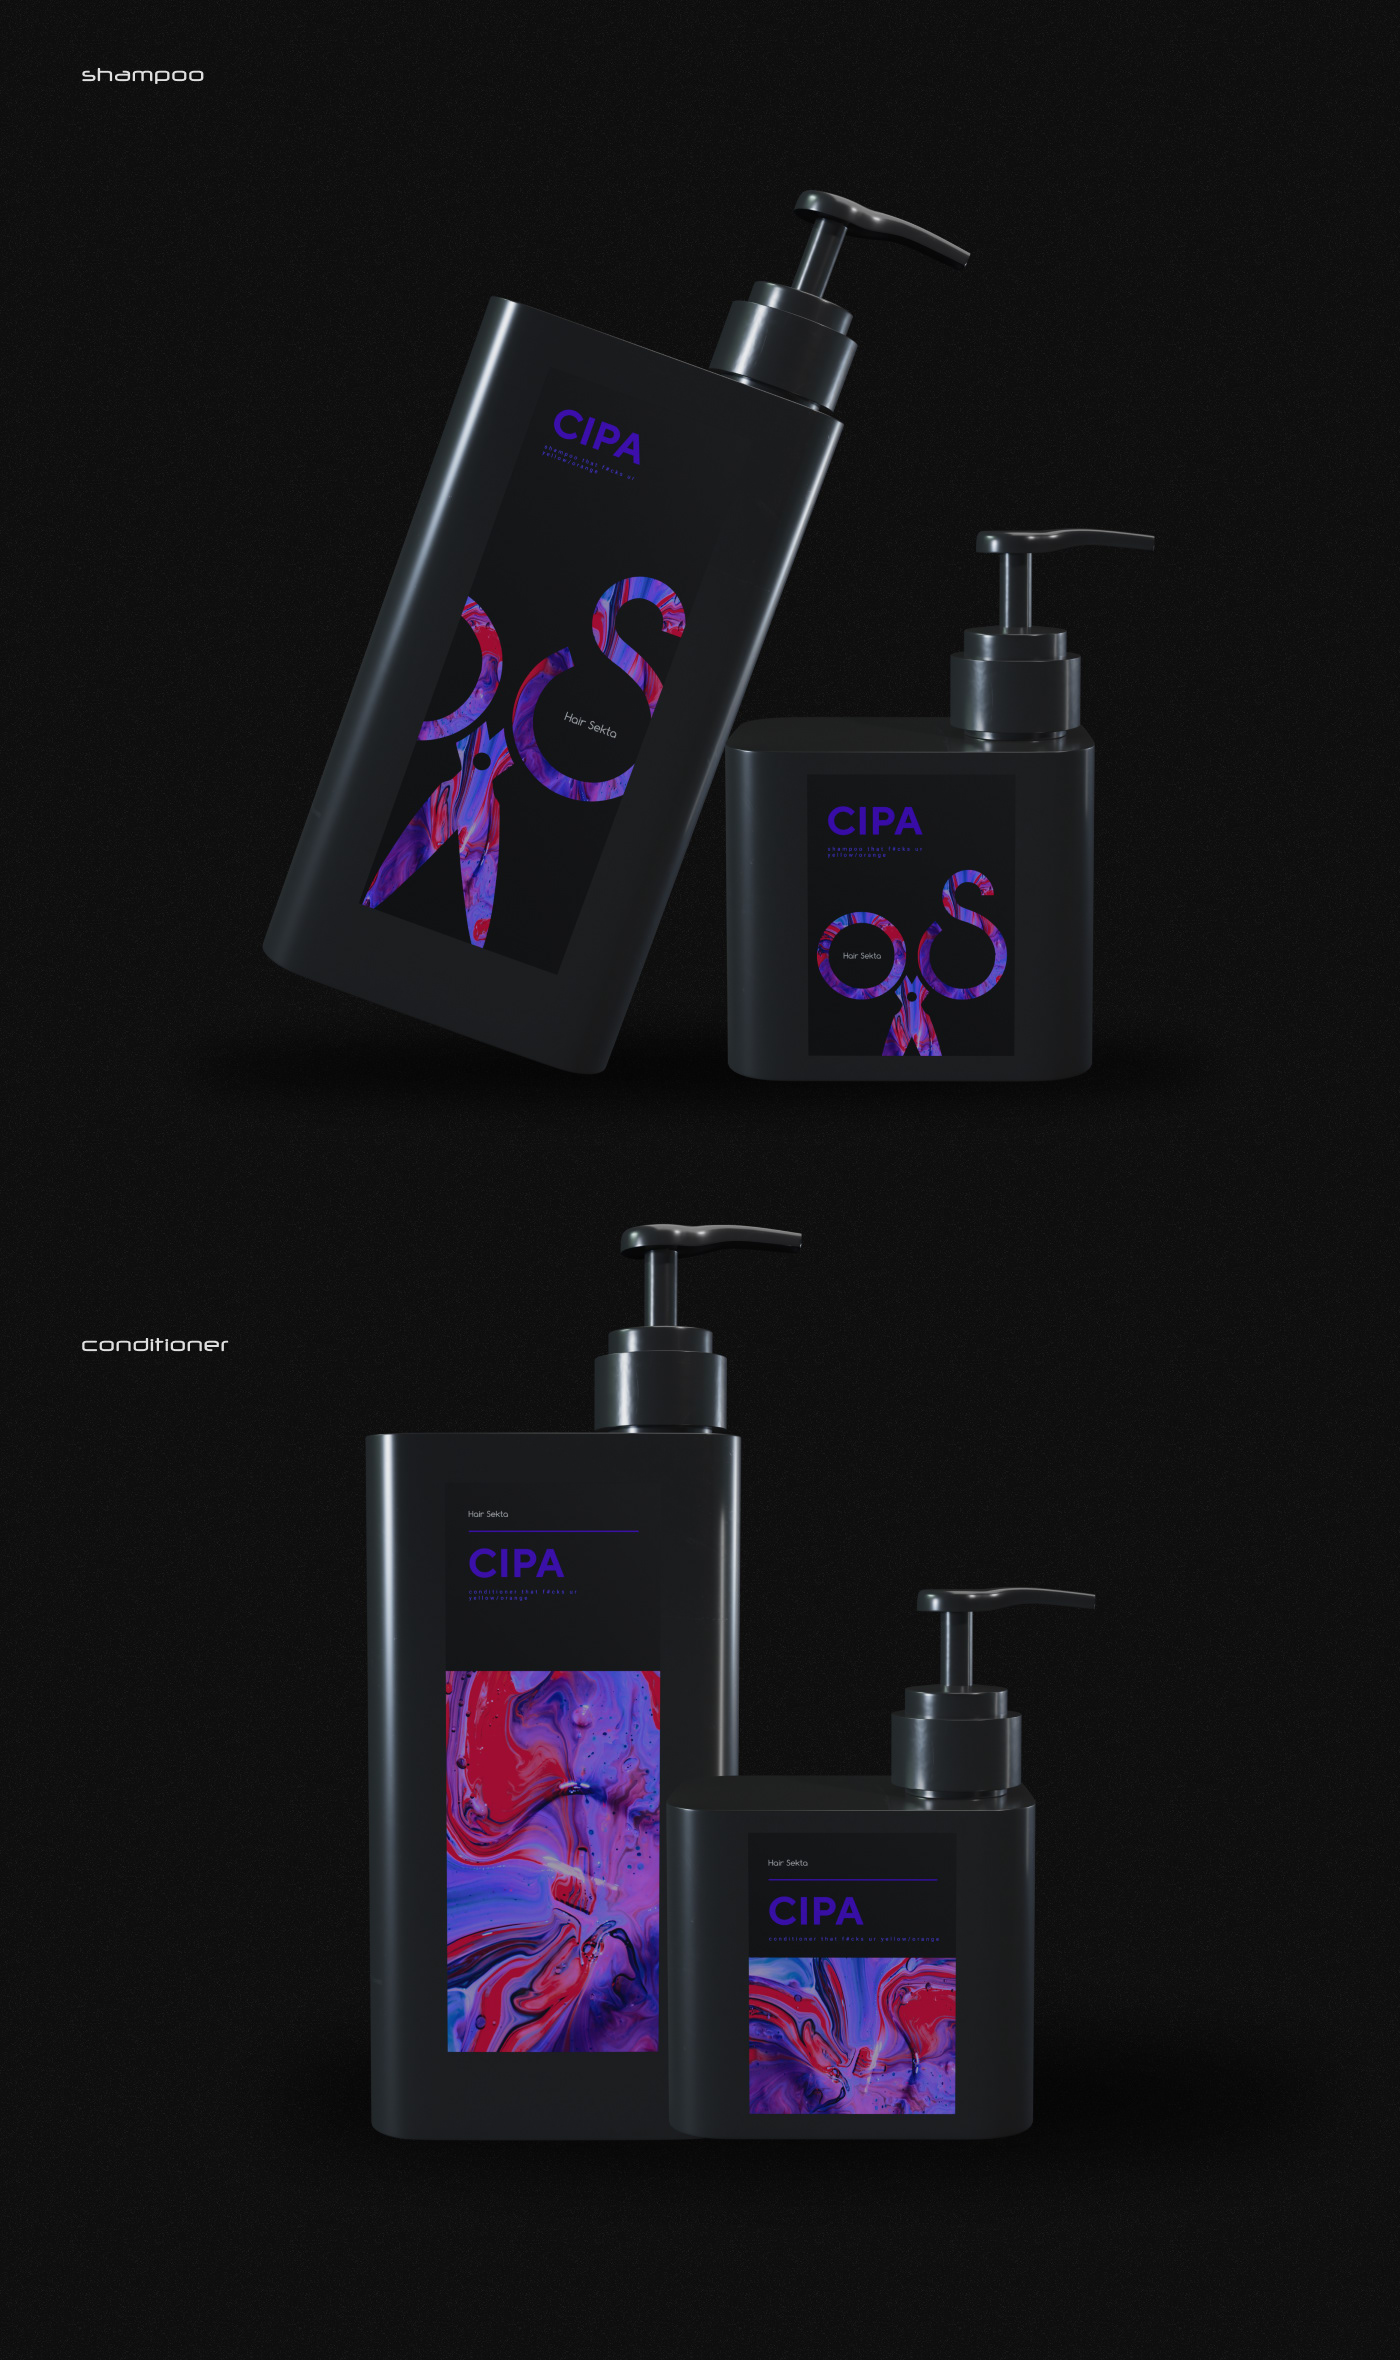 3D 3d animation 3d modeling 3DDesign 3dvisualization conditioner design product product design  shampoo